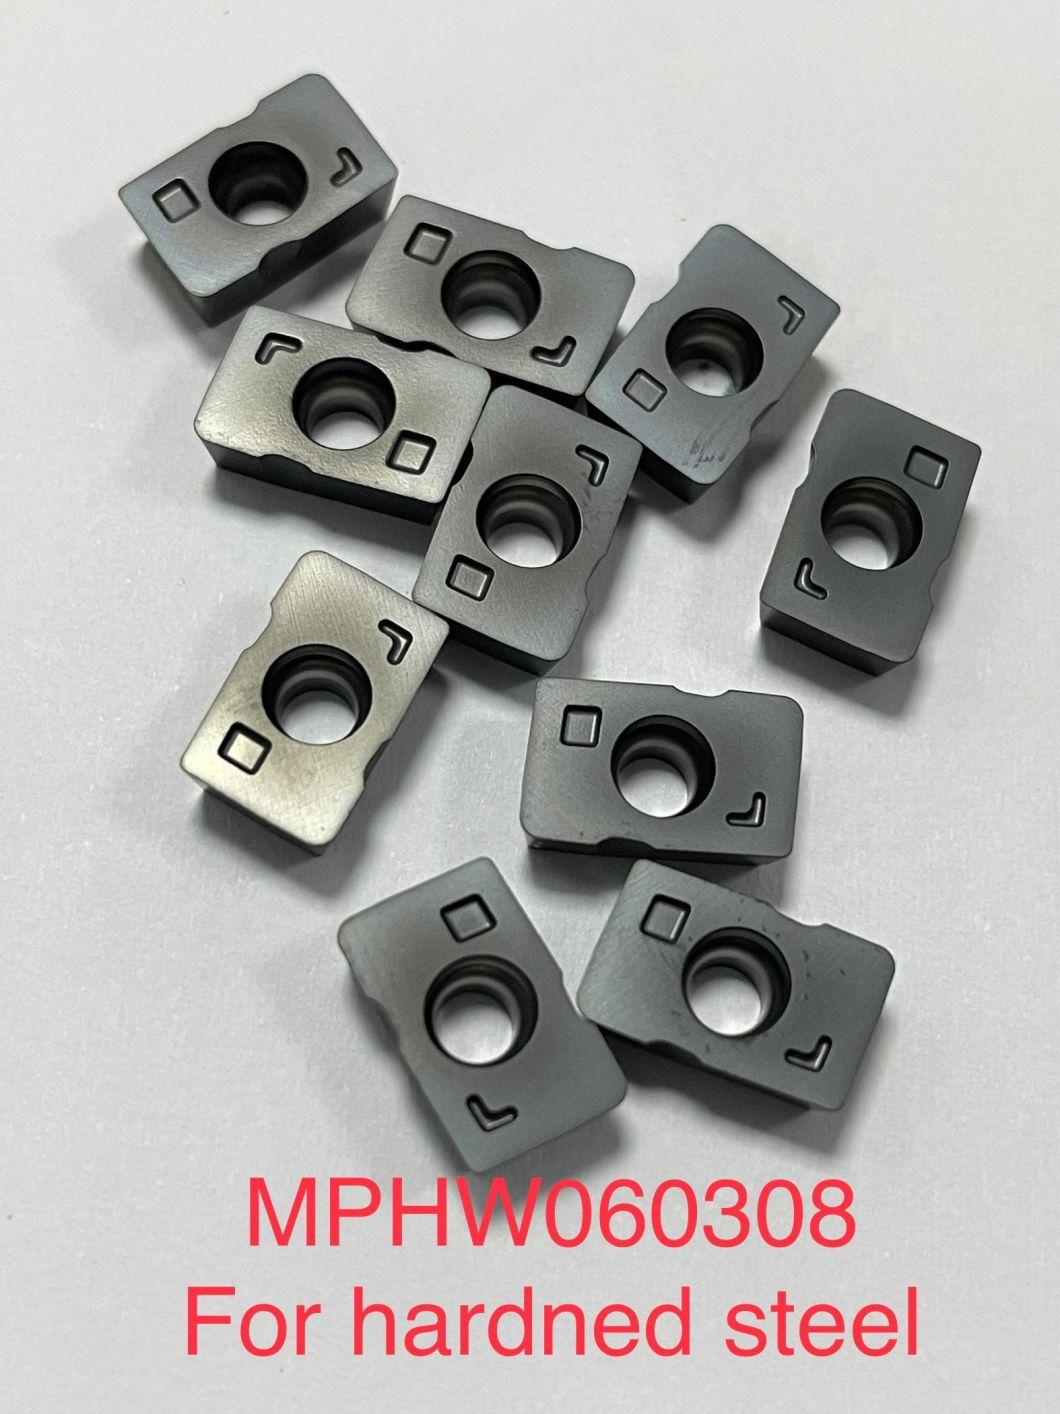 Tungsten Carbide CNC High Feed Turning Thread Milling Inserts Apmt1135pder-M2